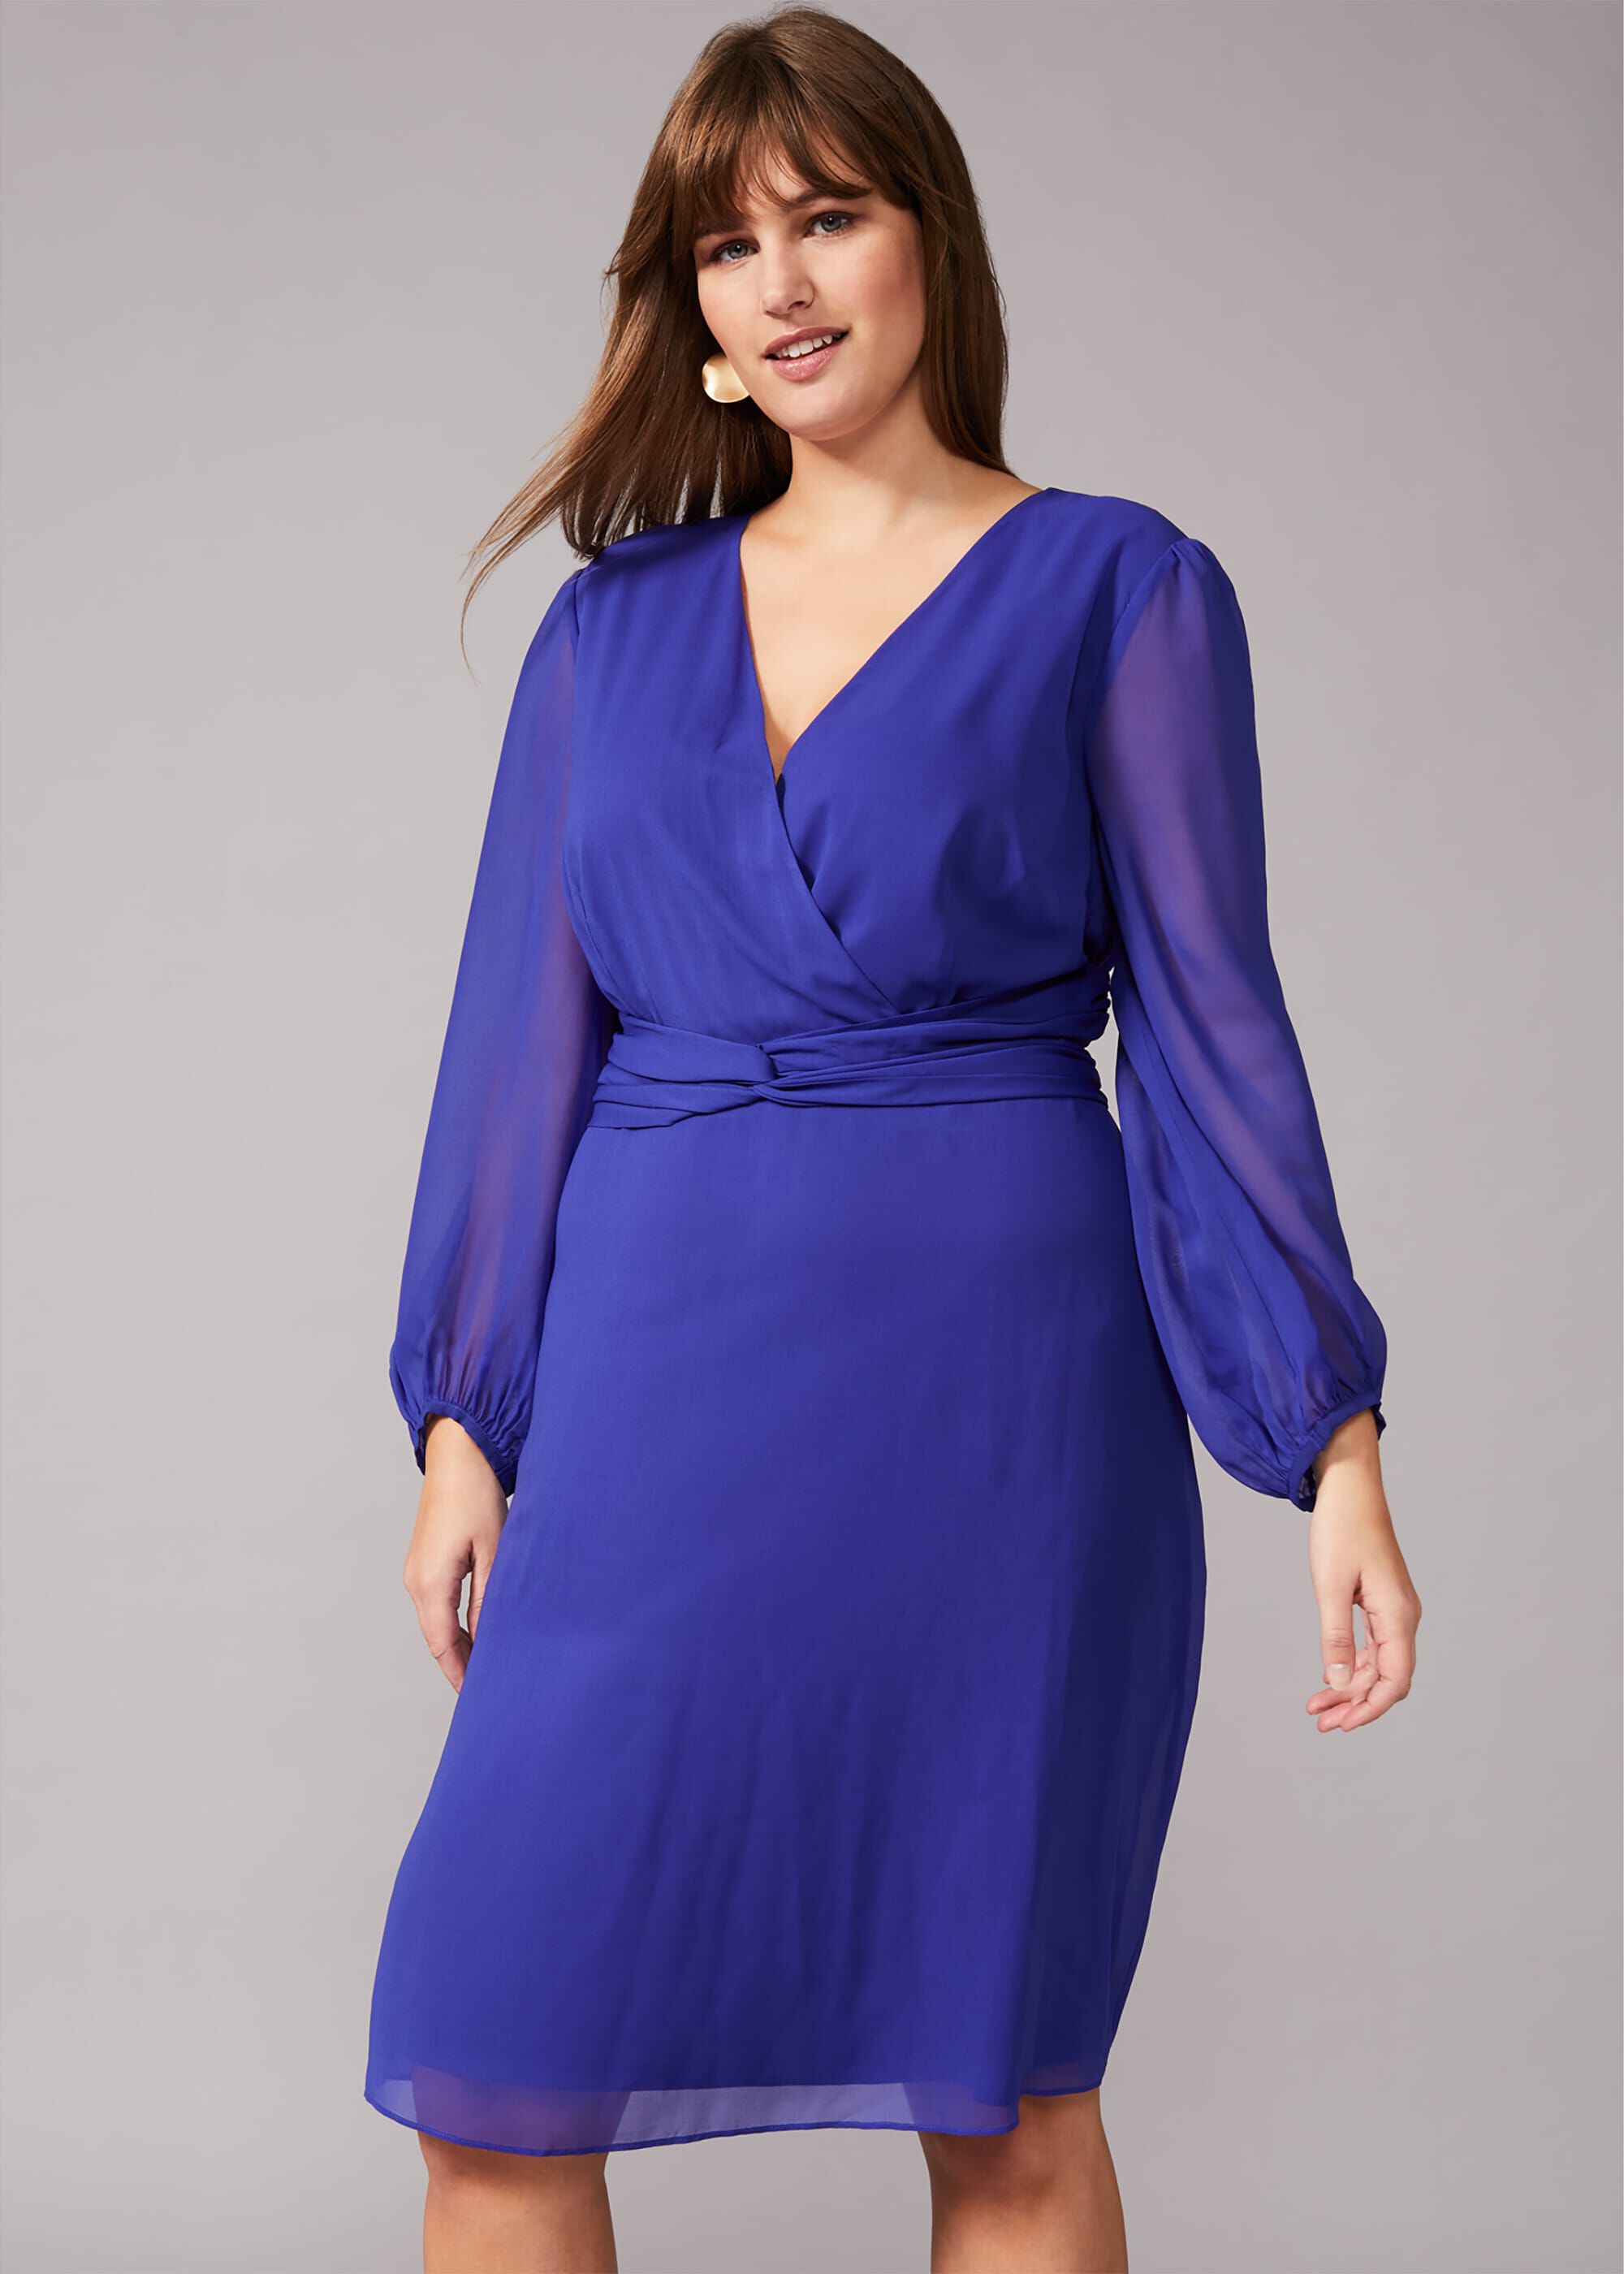 Phase Eight Plus Size Flash Sales, 58% OFF | campingcanyelles.com